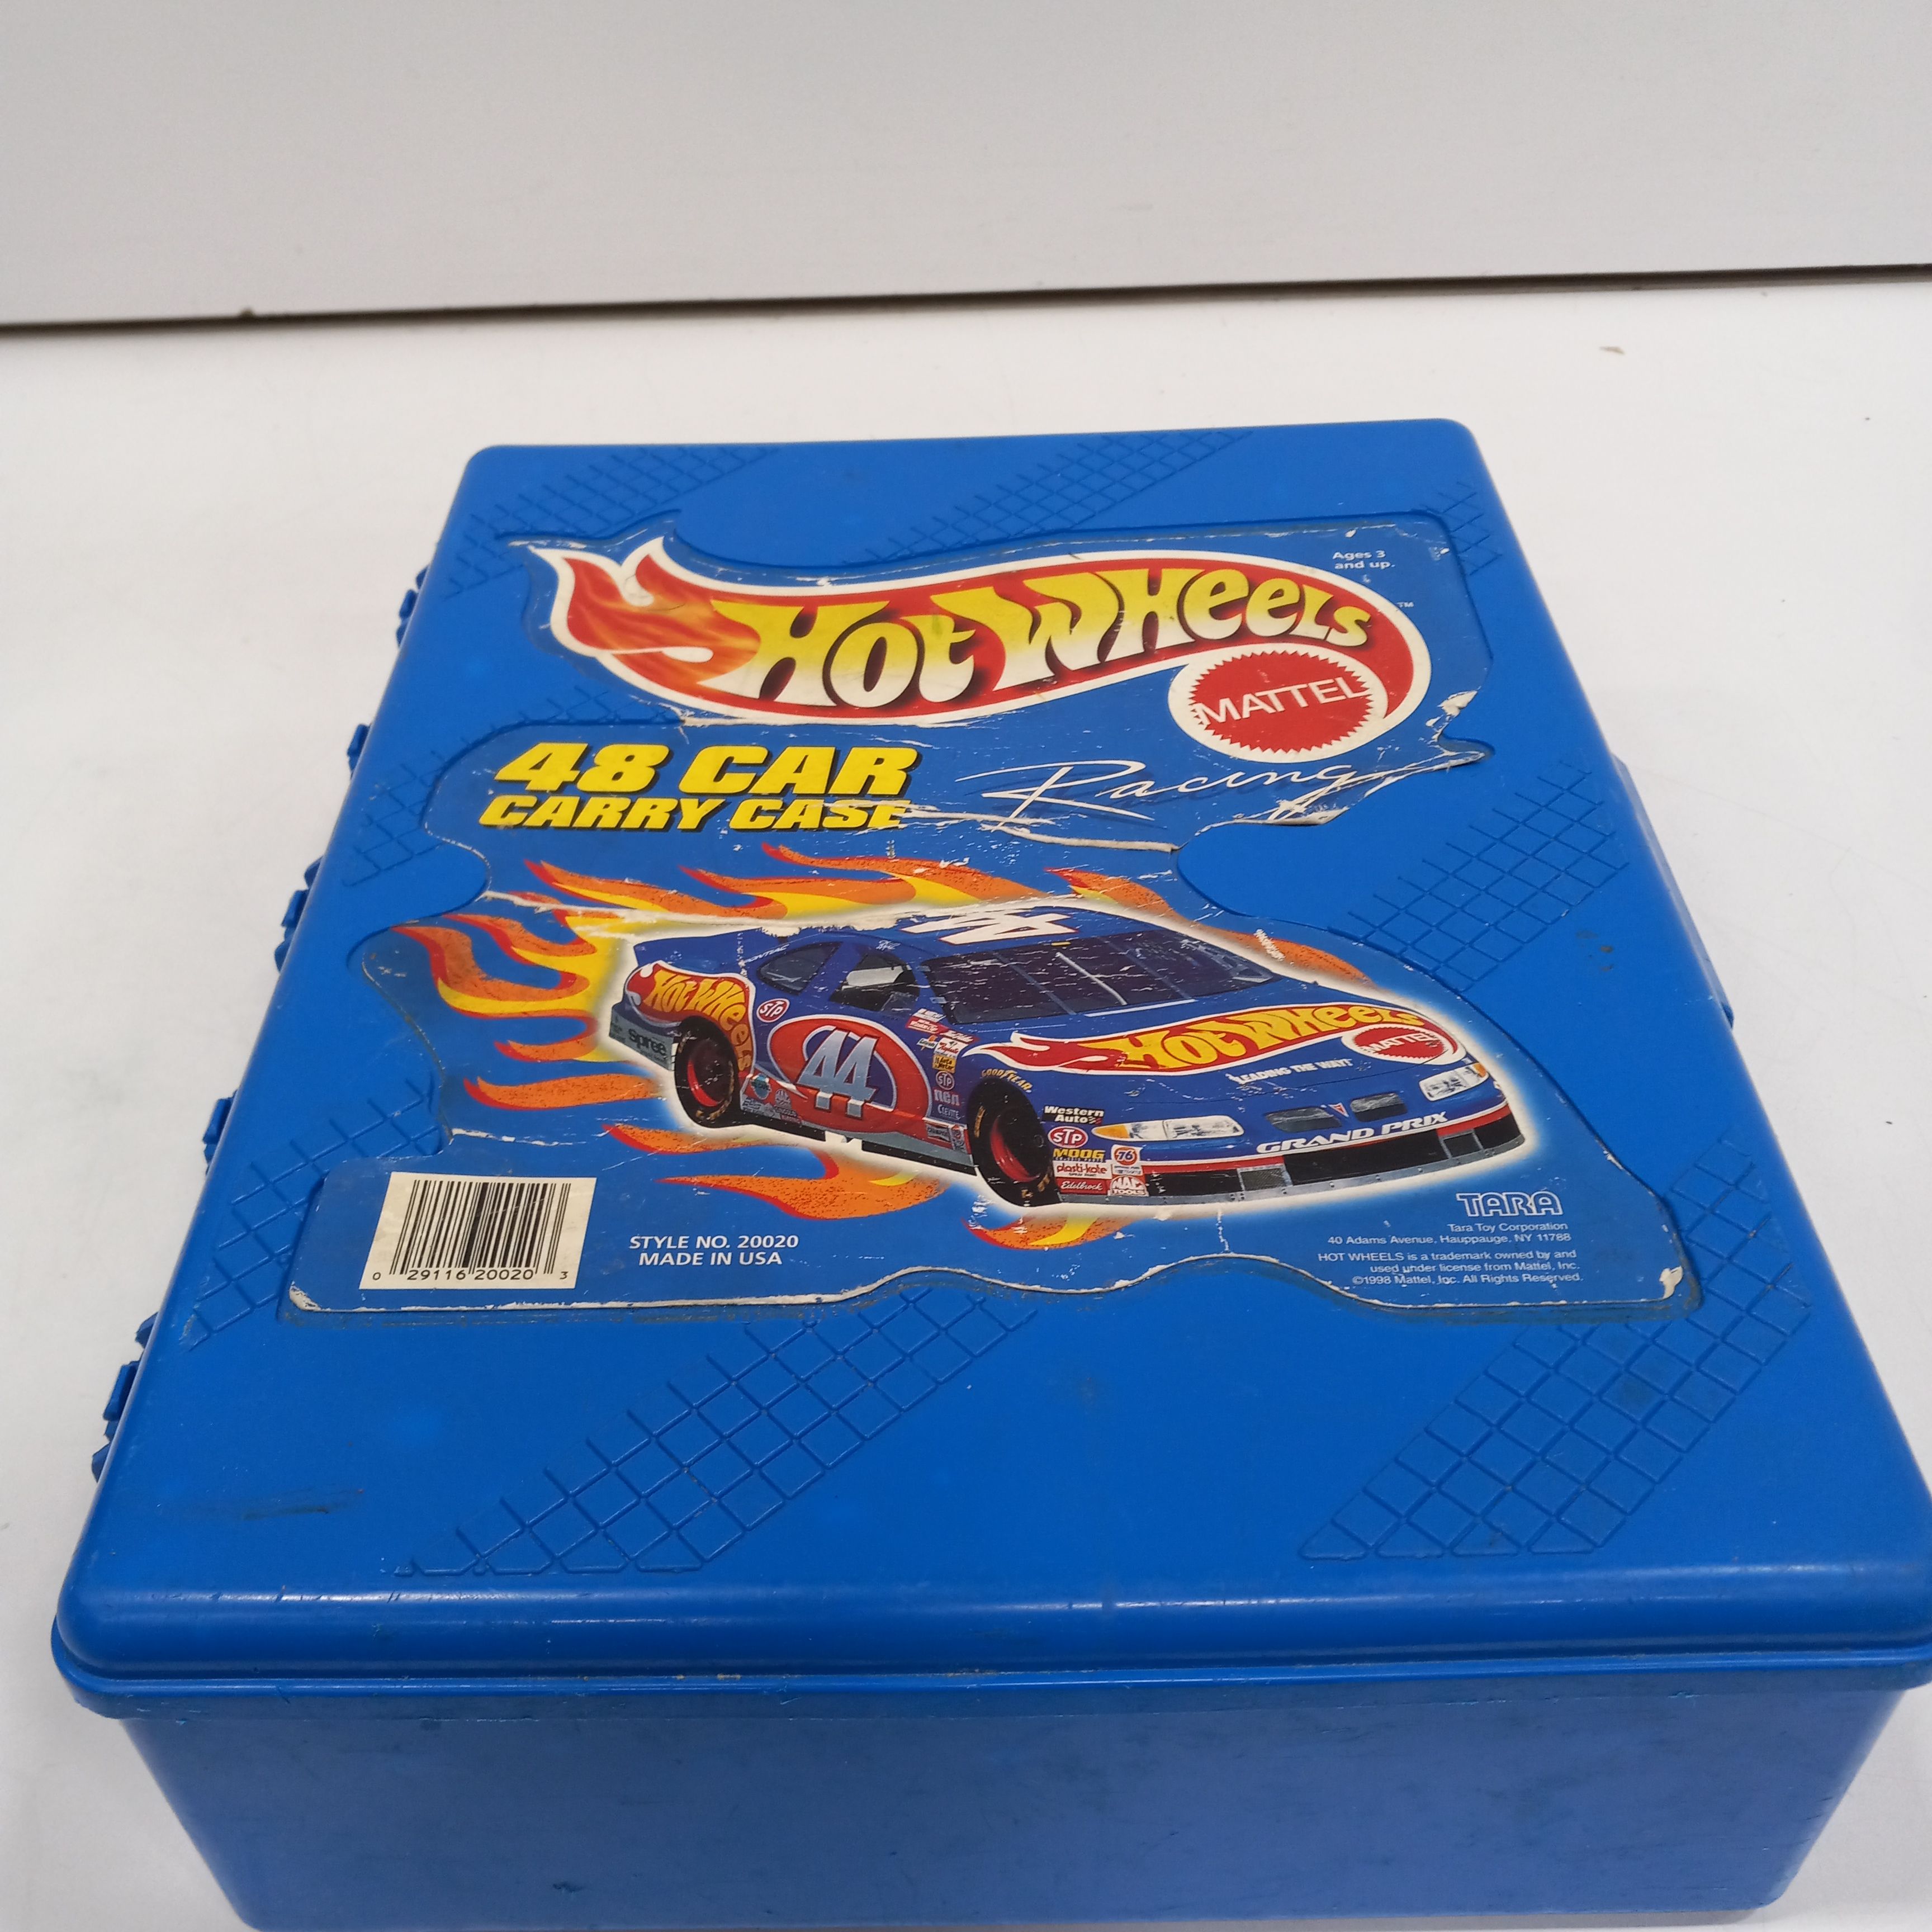 Hot Wheels 100 Car Carrying Case w/50 Cars Inside - Rolling Storage Suitcase